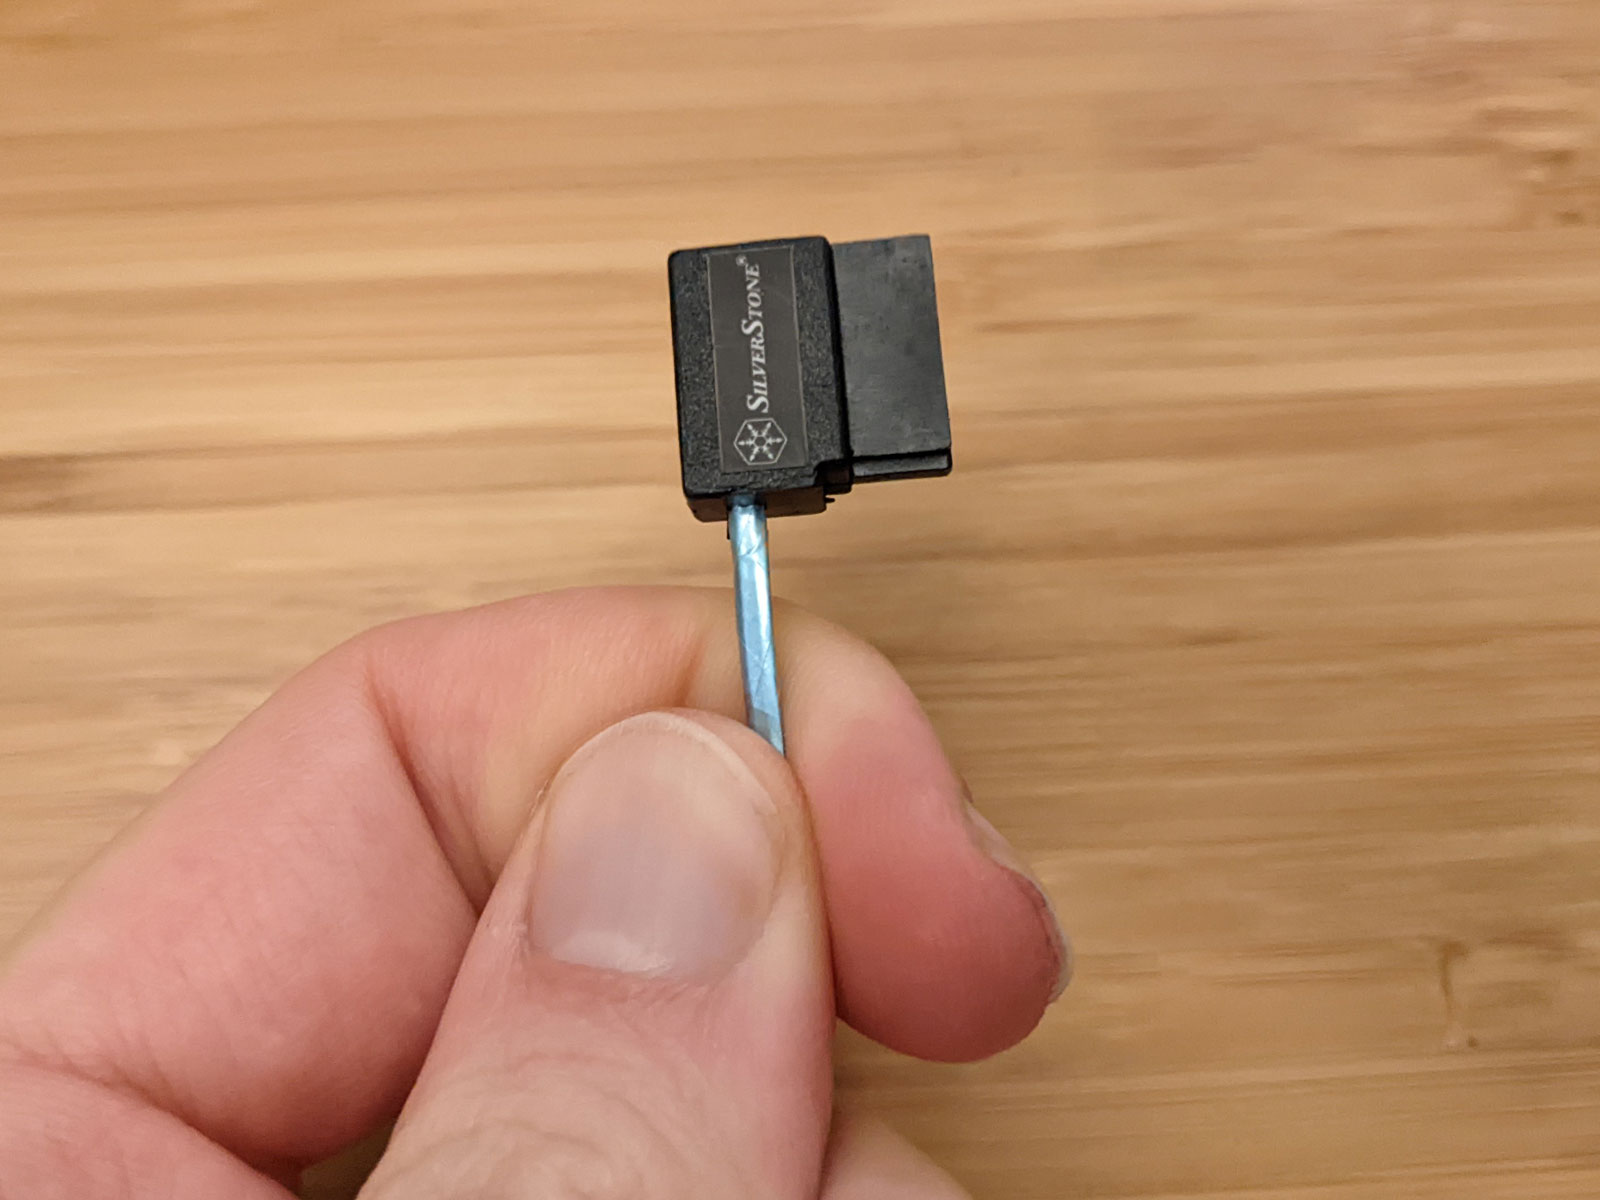 Me holding 90-degree SATA cable